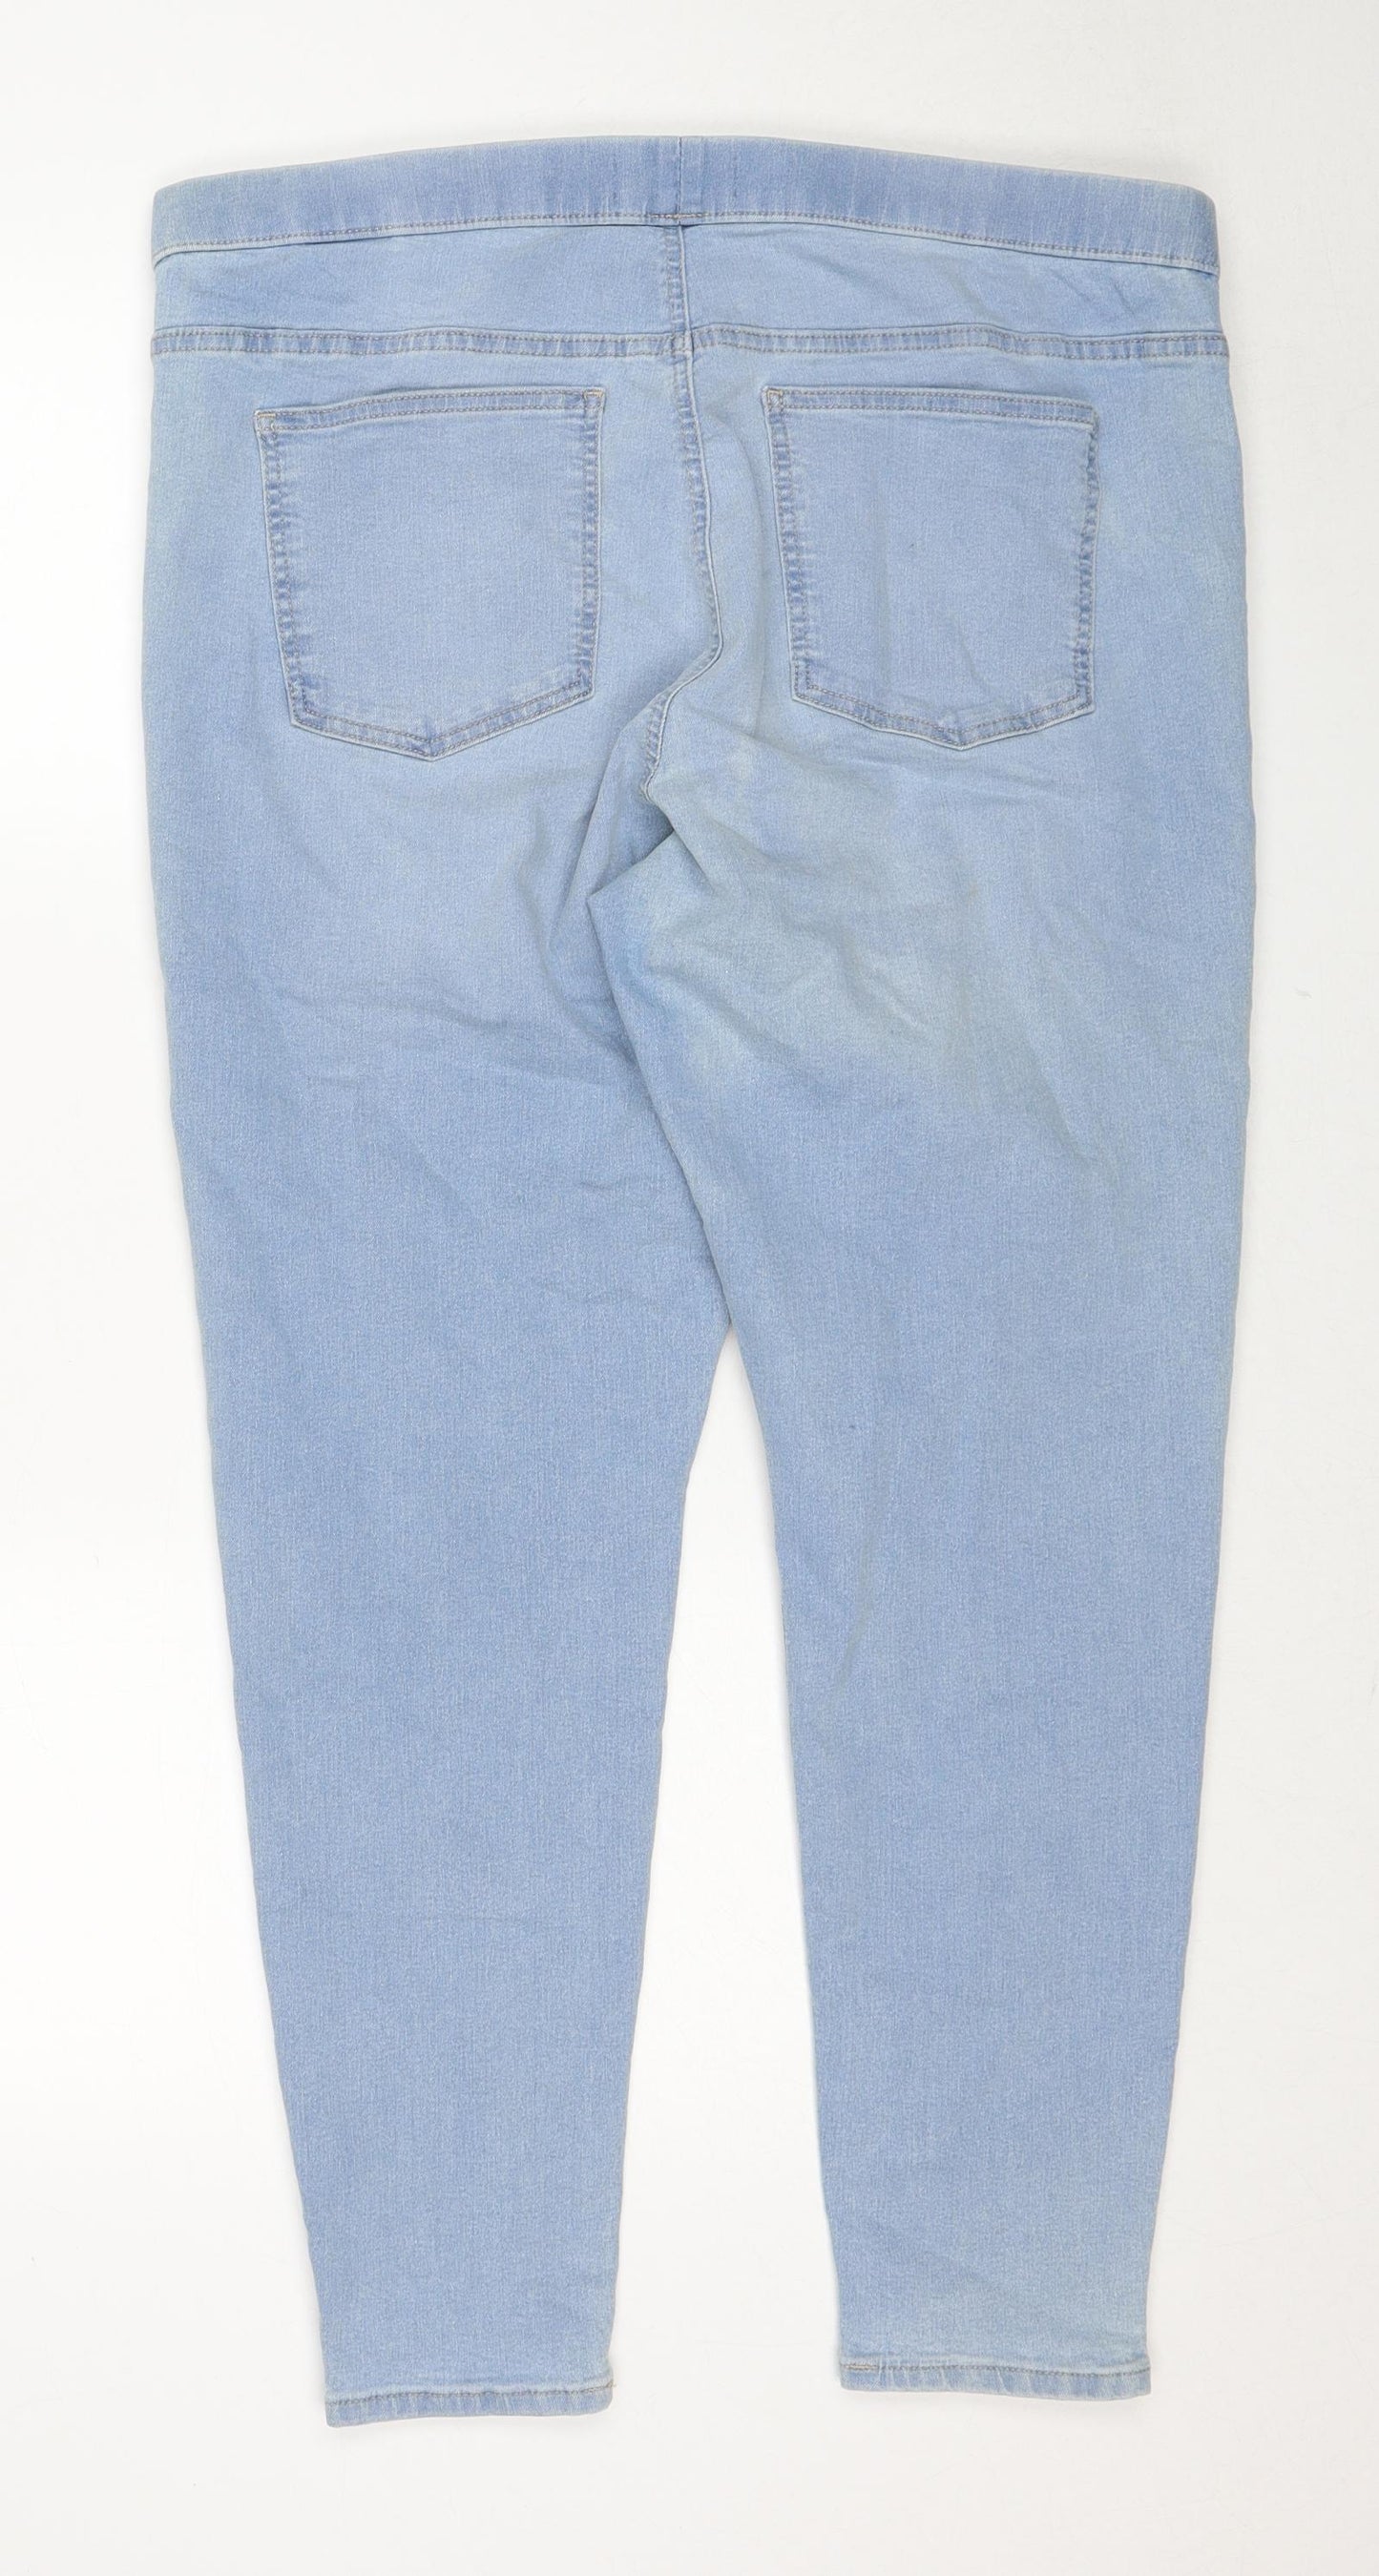 Marks and Spencer Womens Blue Cotton Jegging Jeans Size 20 Regular Zip